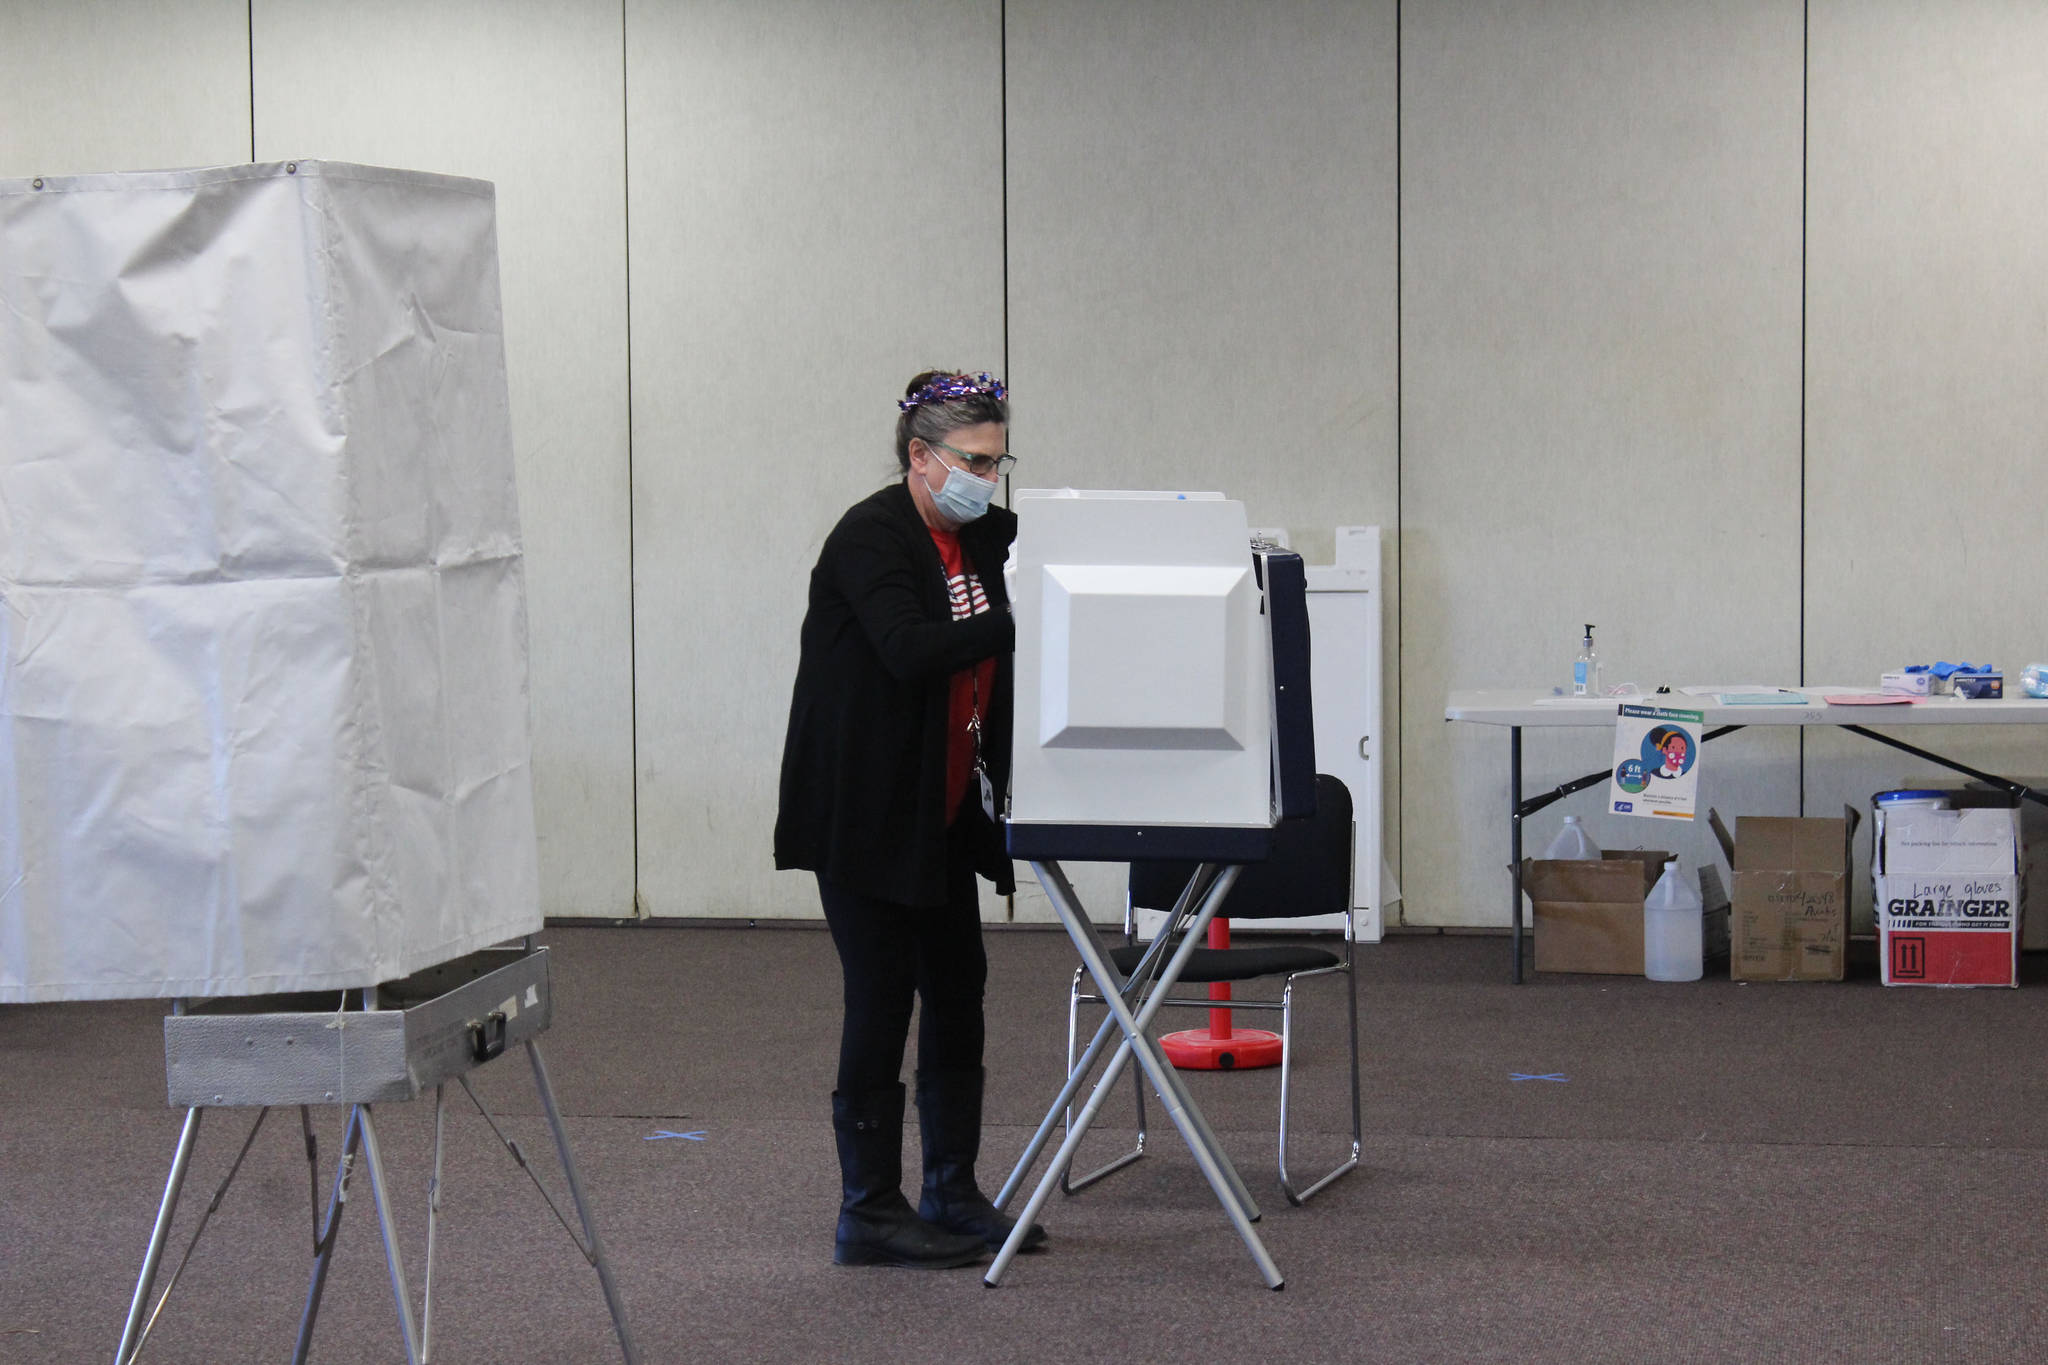 A poll worker disinfects a voting booth at the Soldotna Regional Sports Complex on Tuesday, Nov. 3 in Soldotna, Alaska. (Photo by Ashlyn O’Hara/Peninsula Clarion)